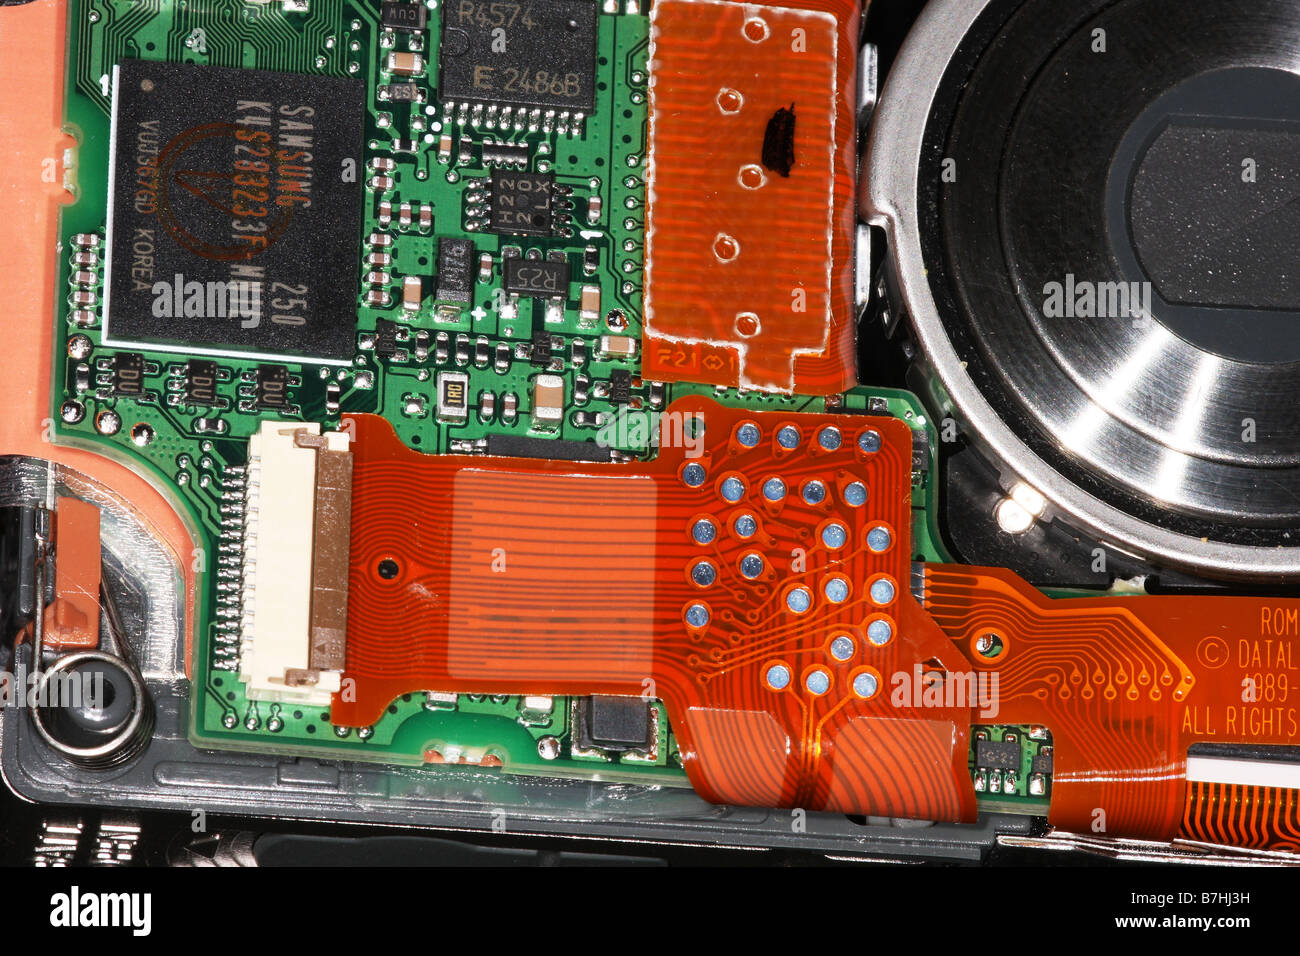 Part of the main circuit board in a digital camera with lens assembly on the right. Stock Photo